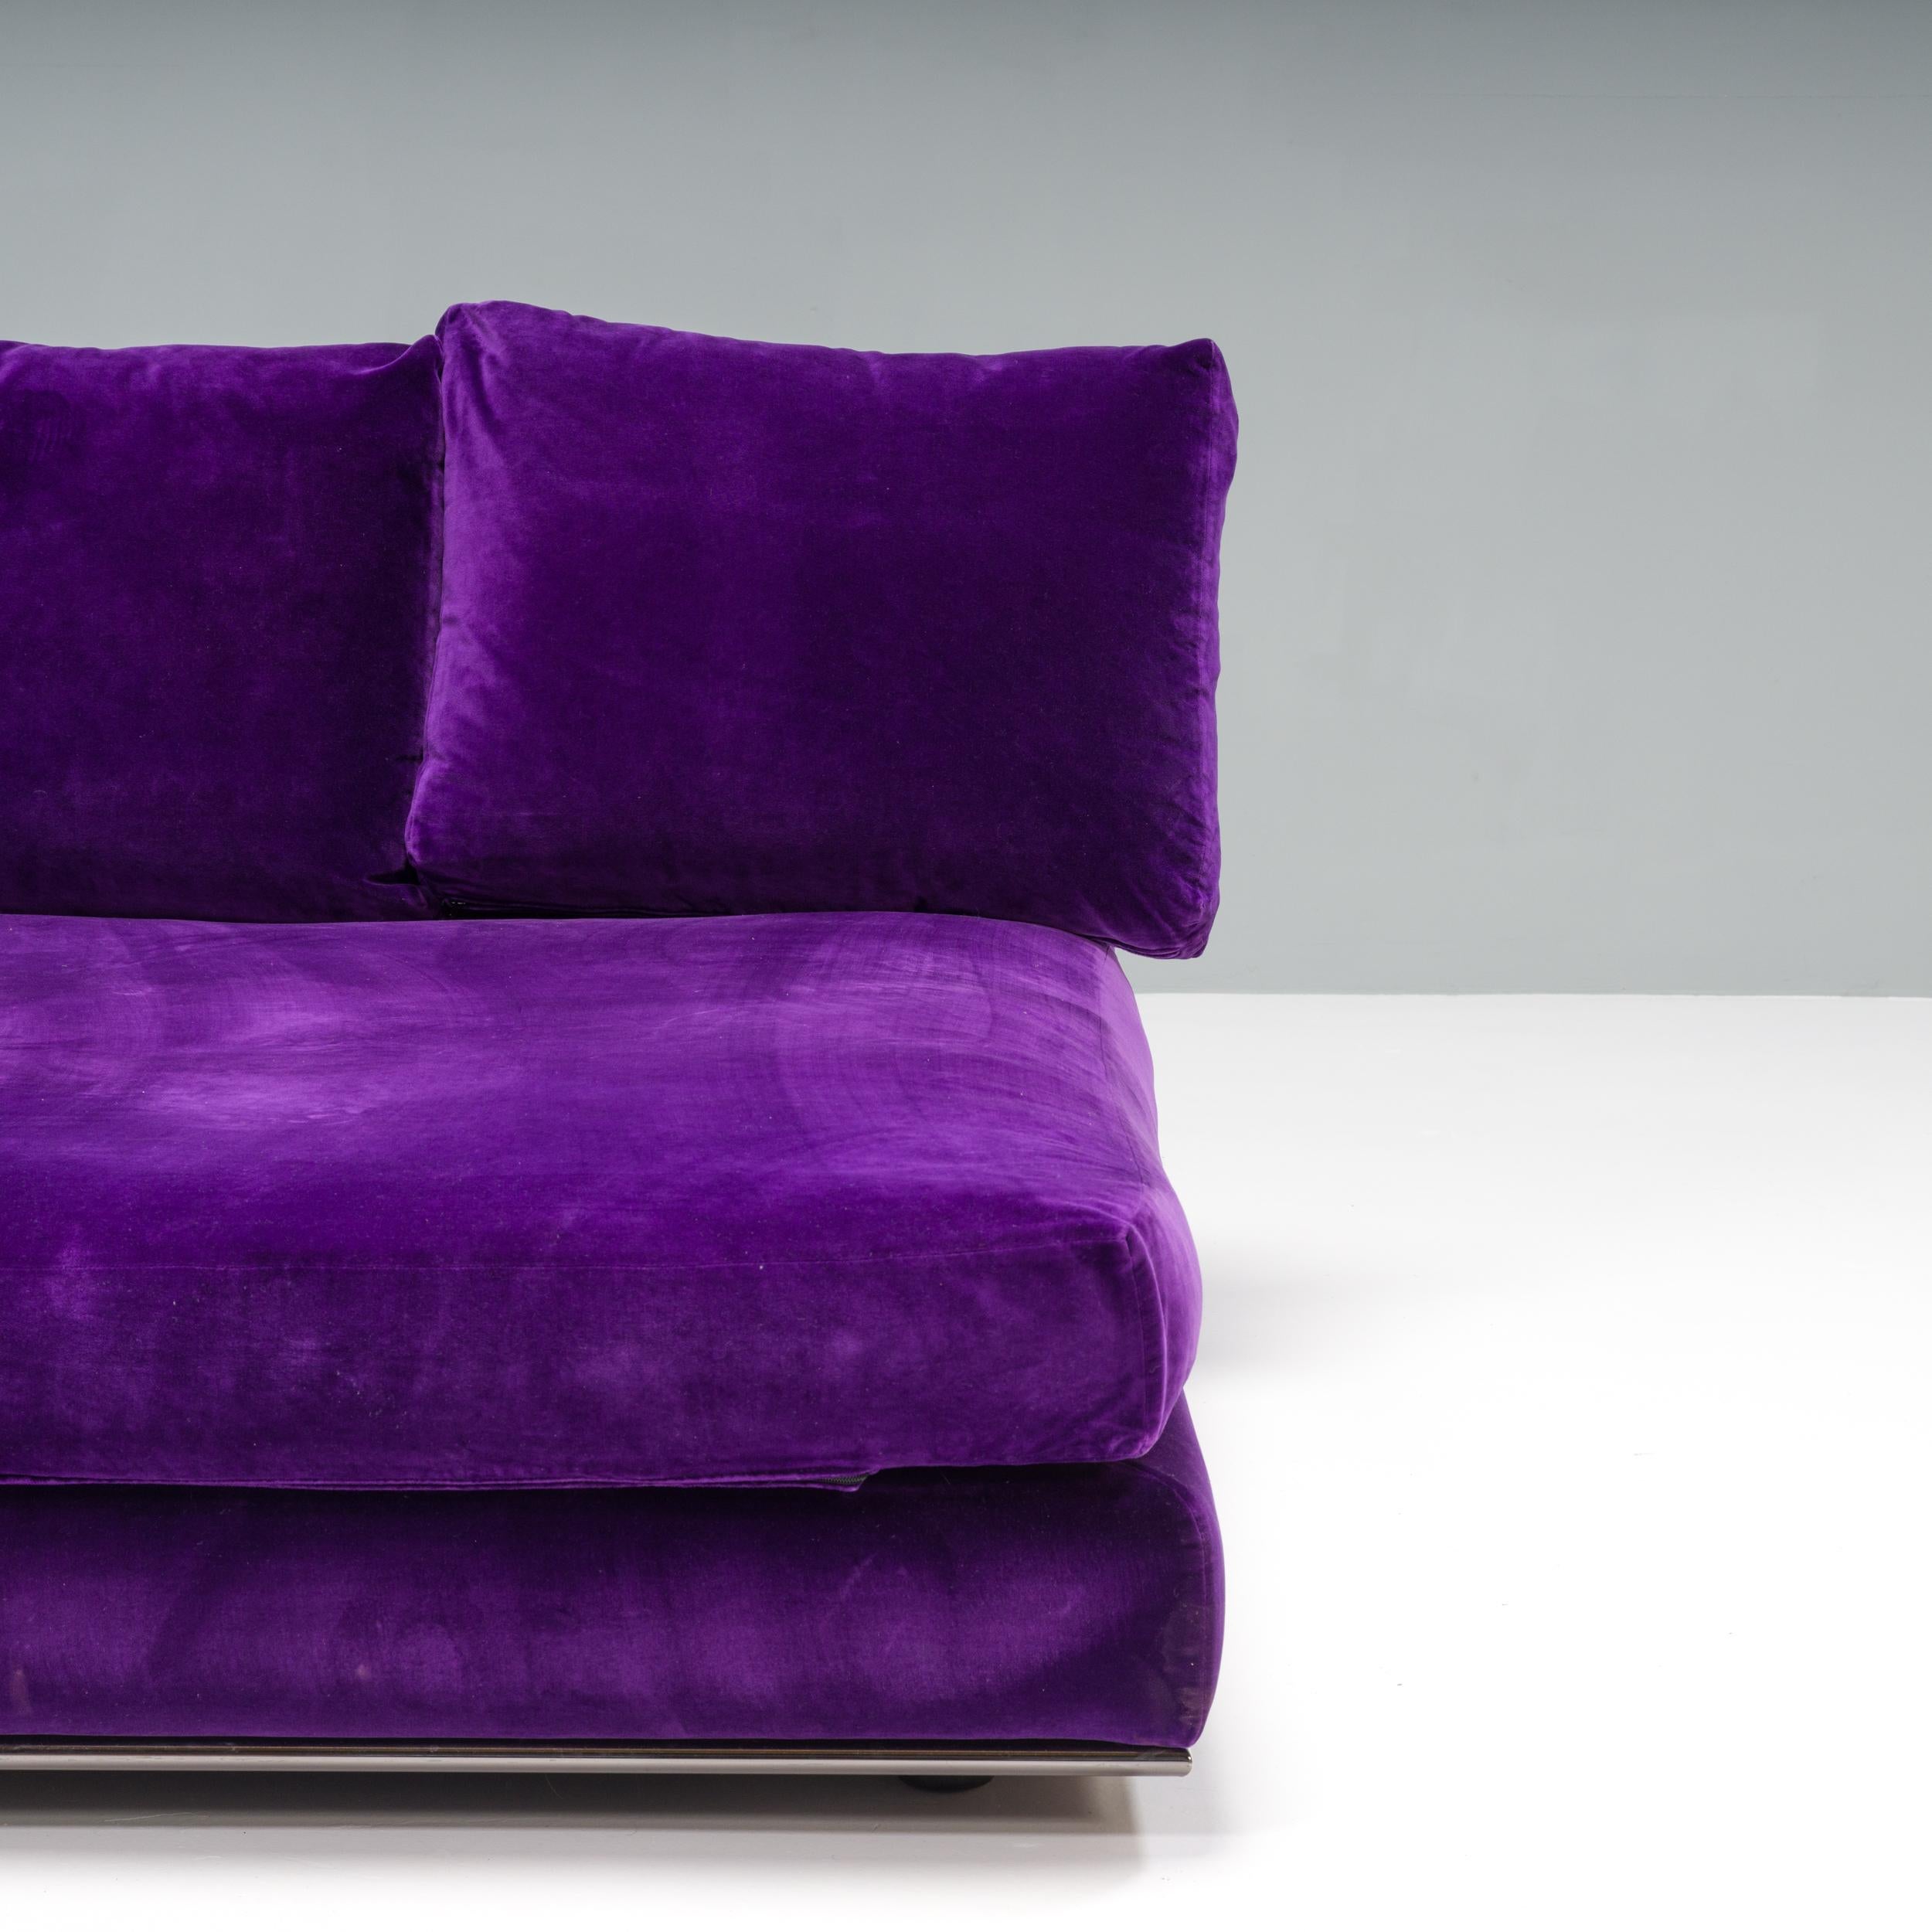 Designed by Minotti, this day bed allows for luxurious lounging. With generous proportions, the bed sits on a slimline chrome frame which gives the impression it is floating slightly above the ground.

Fully upholstered in a bold purple velvet, the